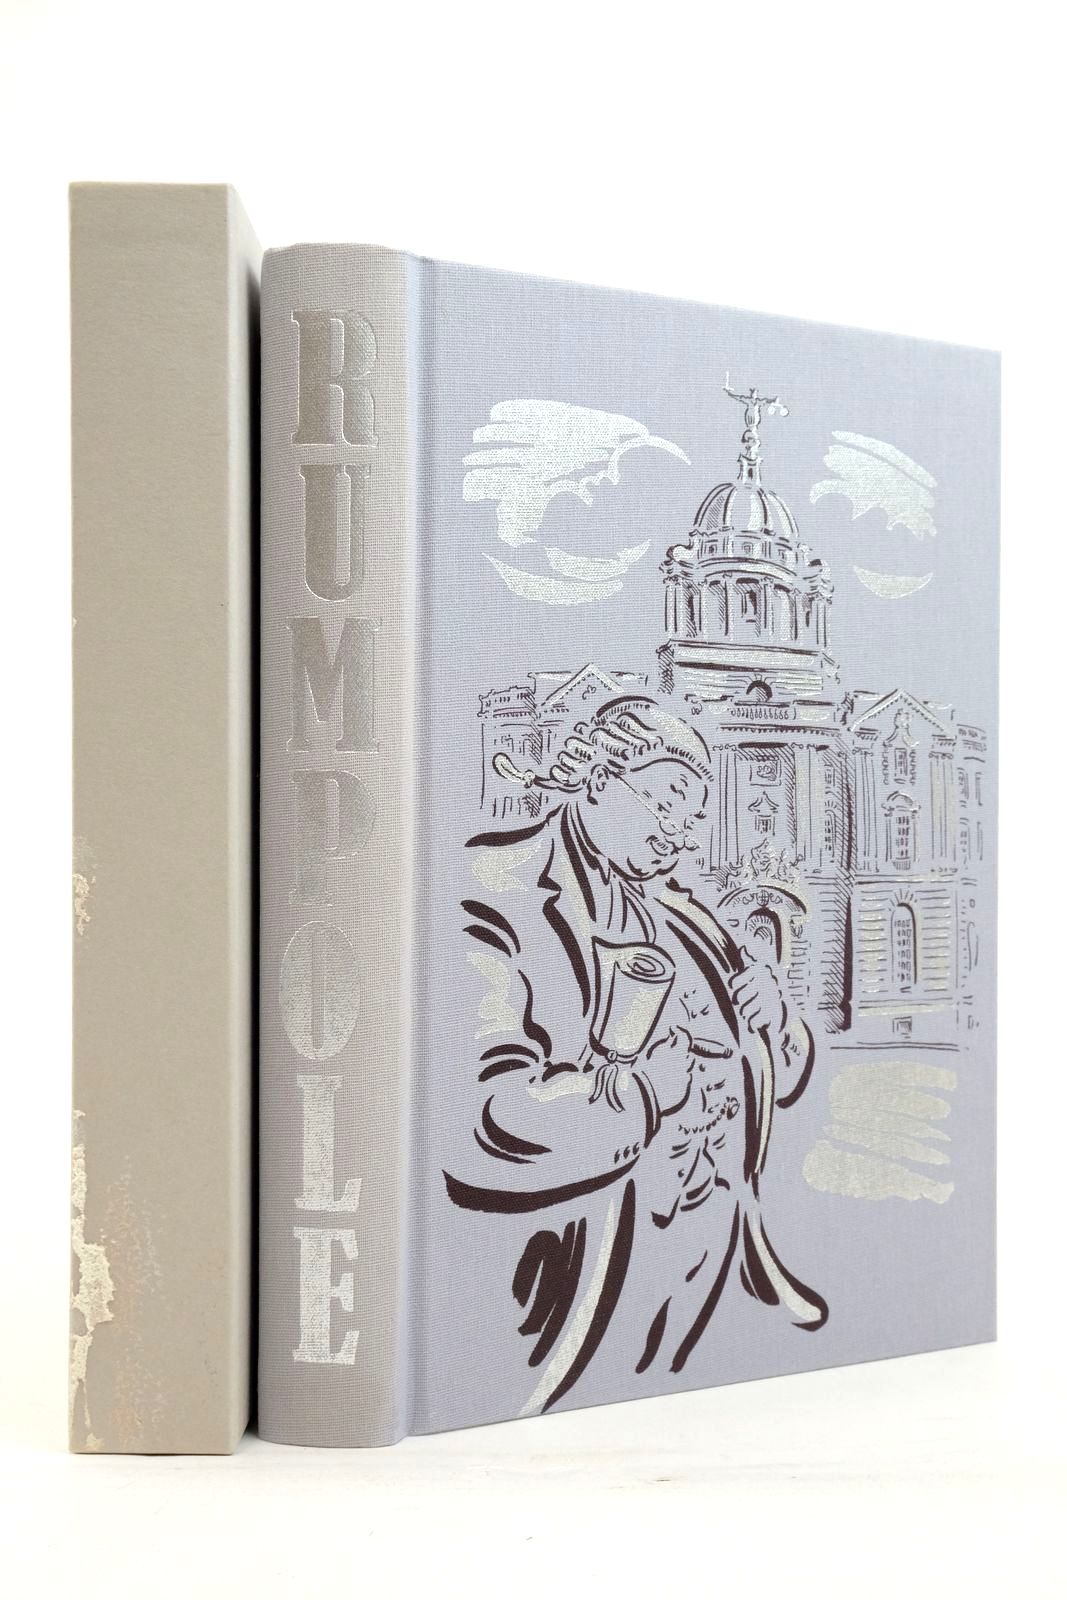 Photo of RUMPOLE written by Mortimer, John illustrated by Cox, Paul published by Folio Society (STOCK CODE: 2138114)  for sale by Stella & Rose's Books